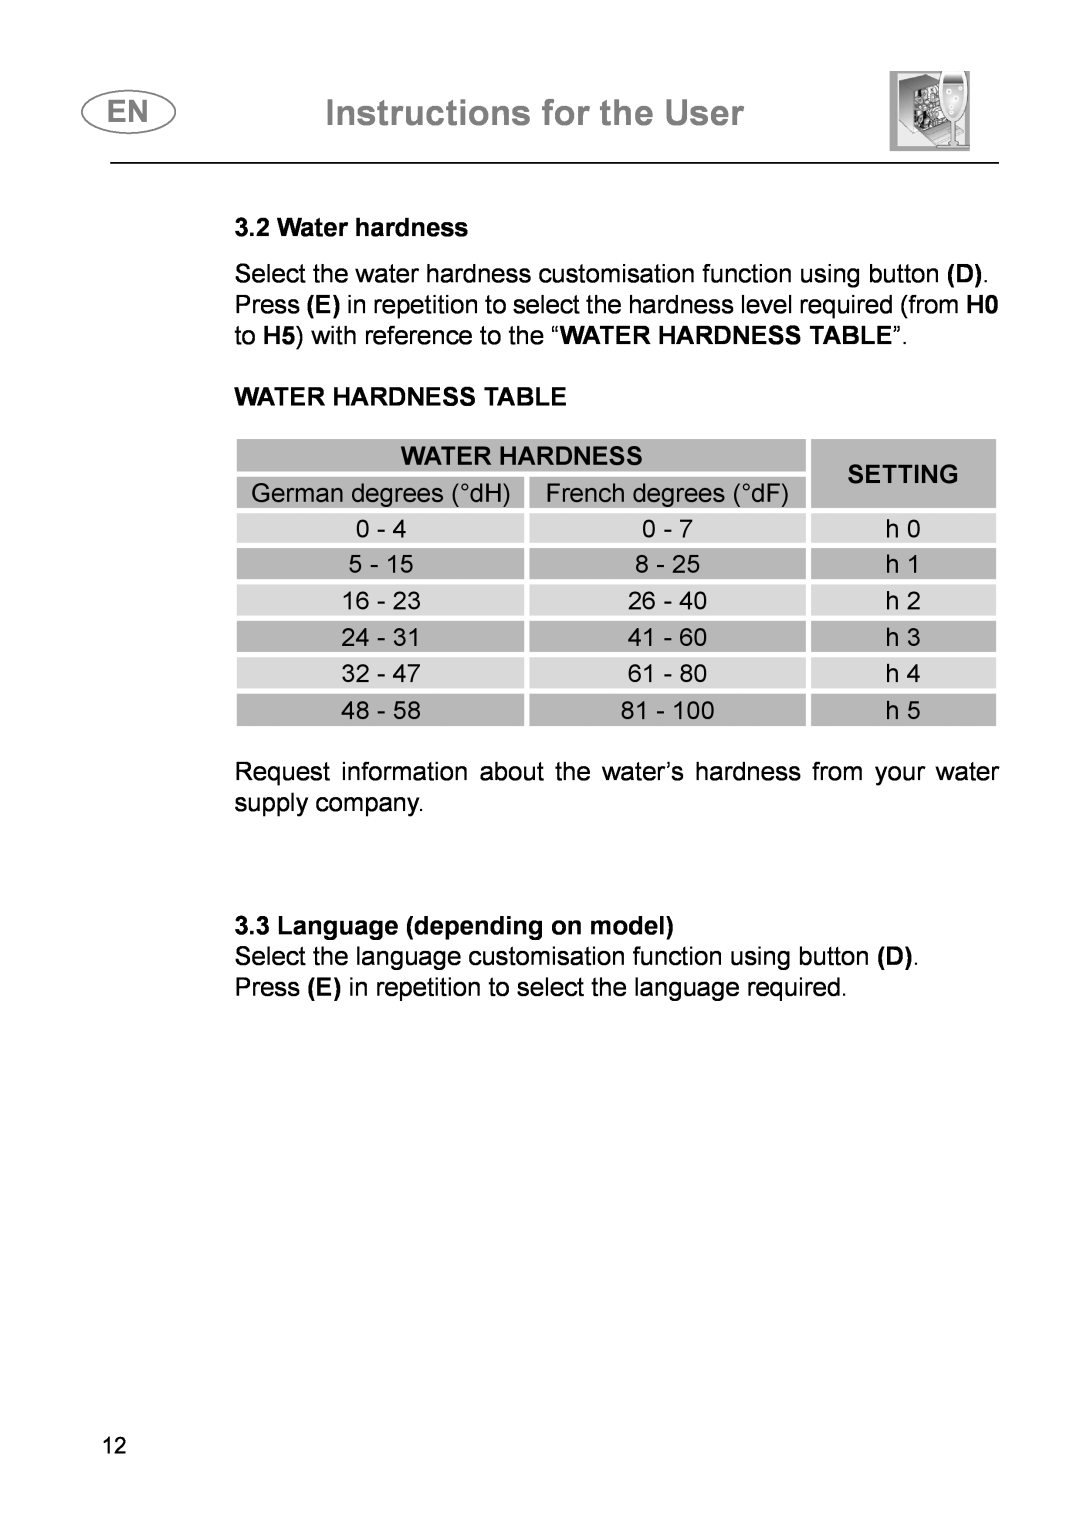 Smeg DI614H instruction manual Water hardness, Water Hardness Table, Language depending on model, Instructions for the User 